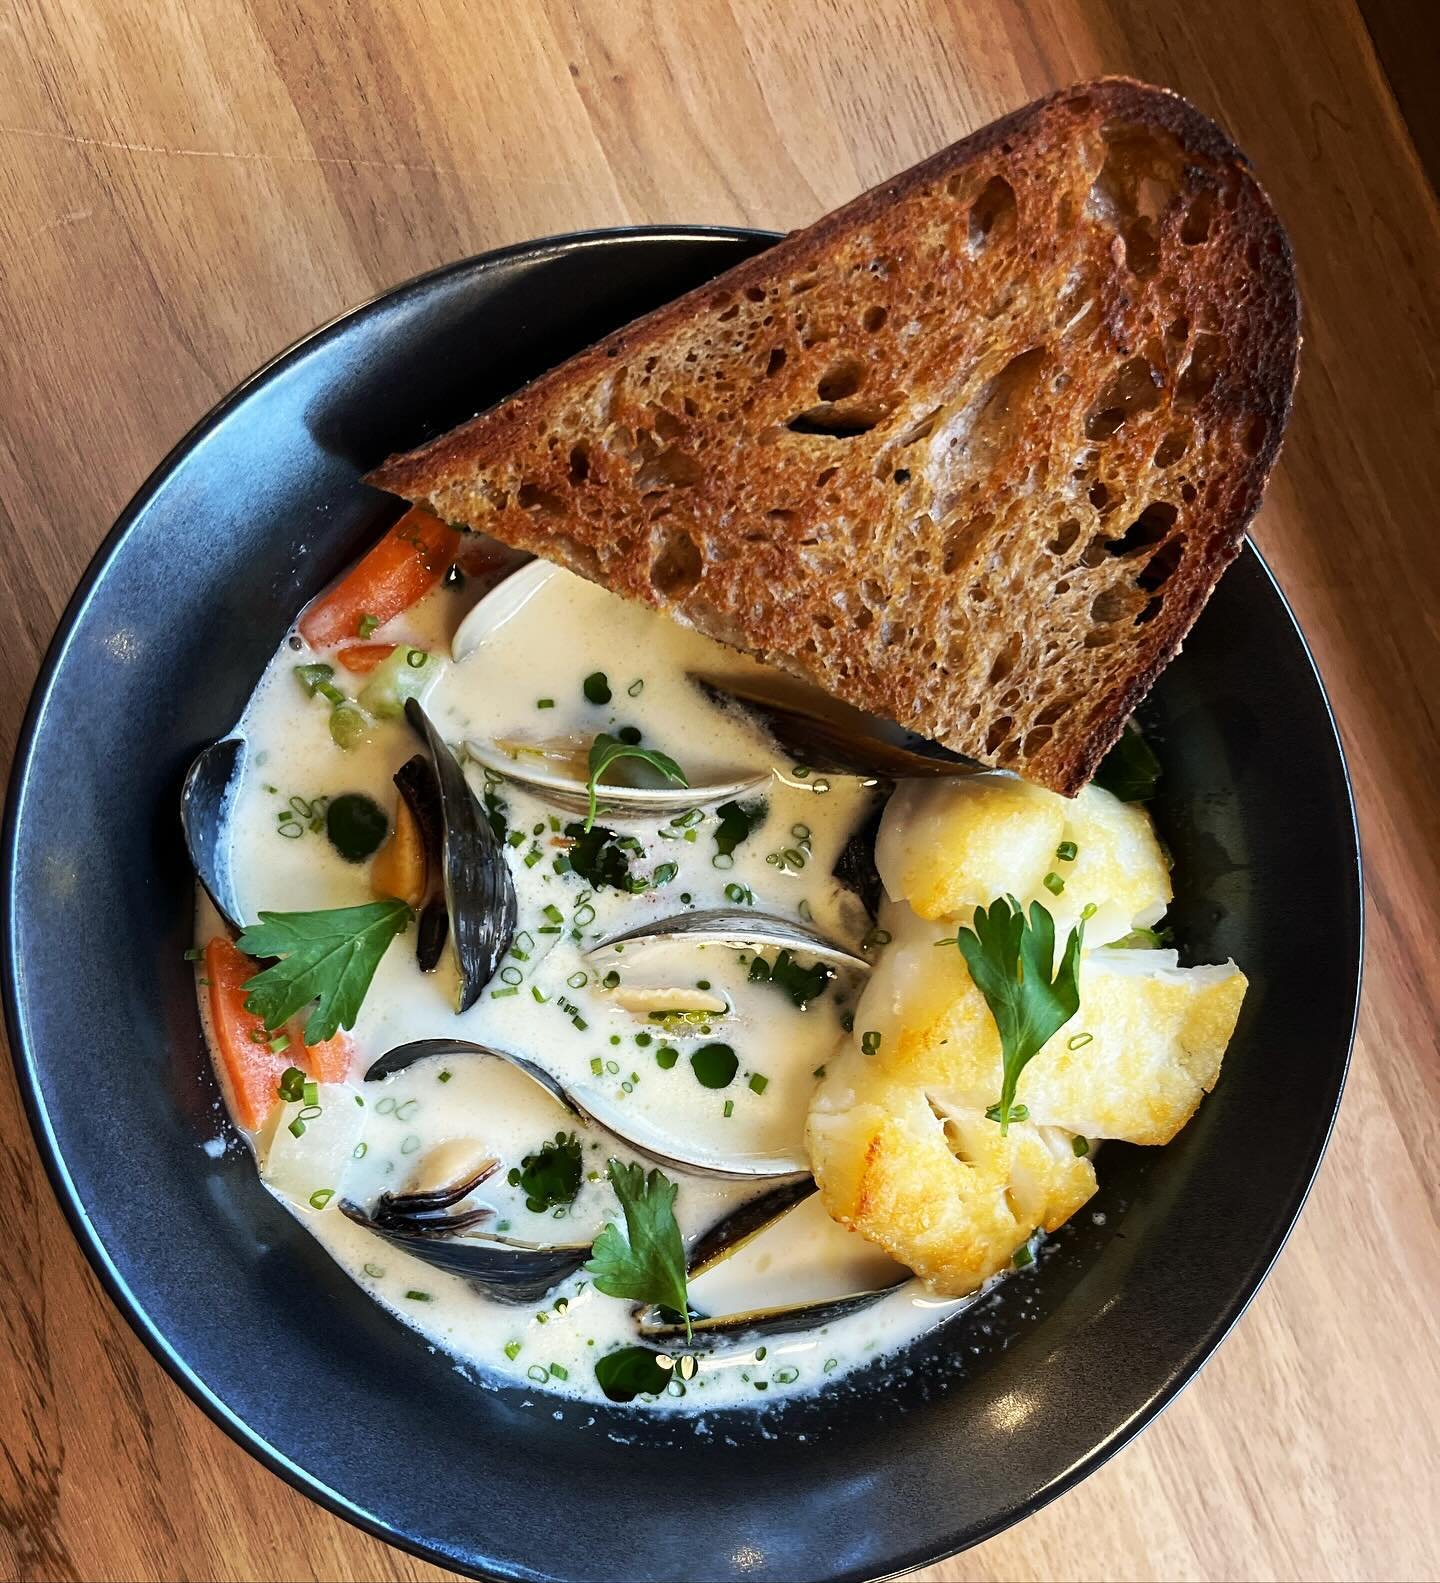 Warmth in a bowl: Cioppino (fisherman&rsquo;s stew) and toasted @theelderbread. 

#cioppino #fishermansstew #mussels #clams #monkfish #broth #comfortfood #coldweather #goodfood #nightmoves #moonlighter